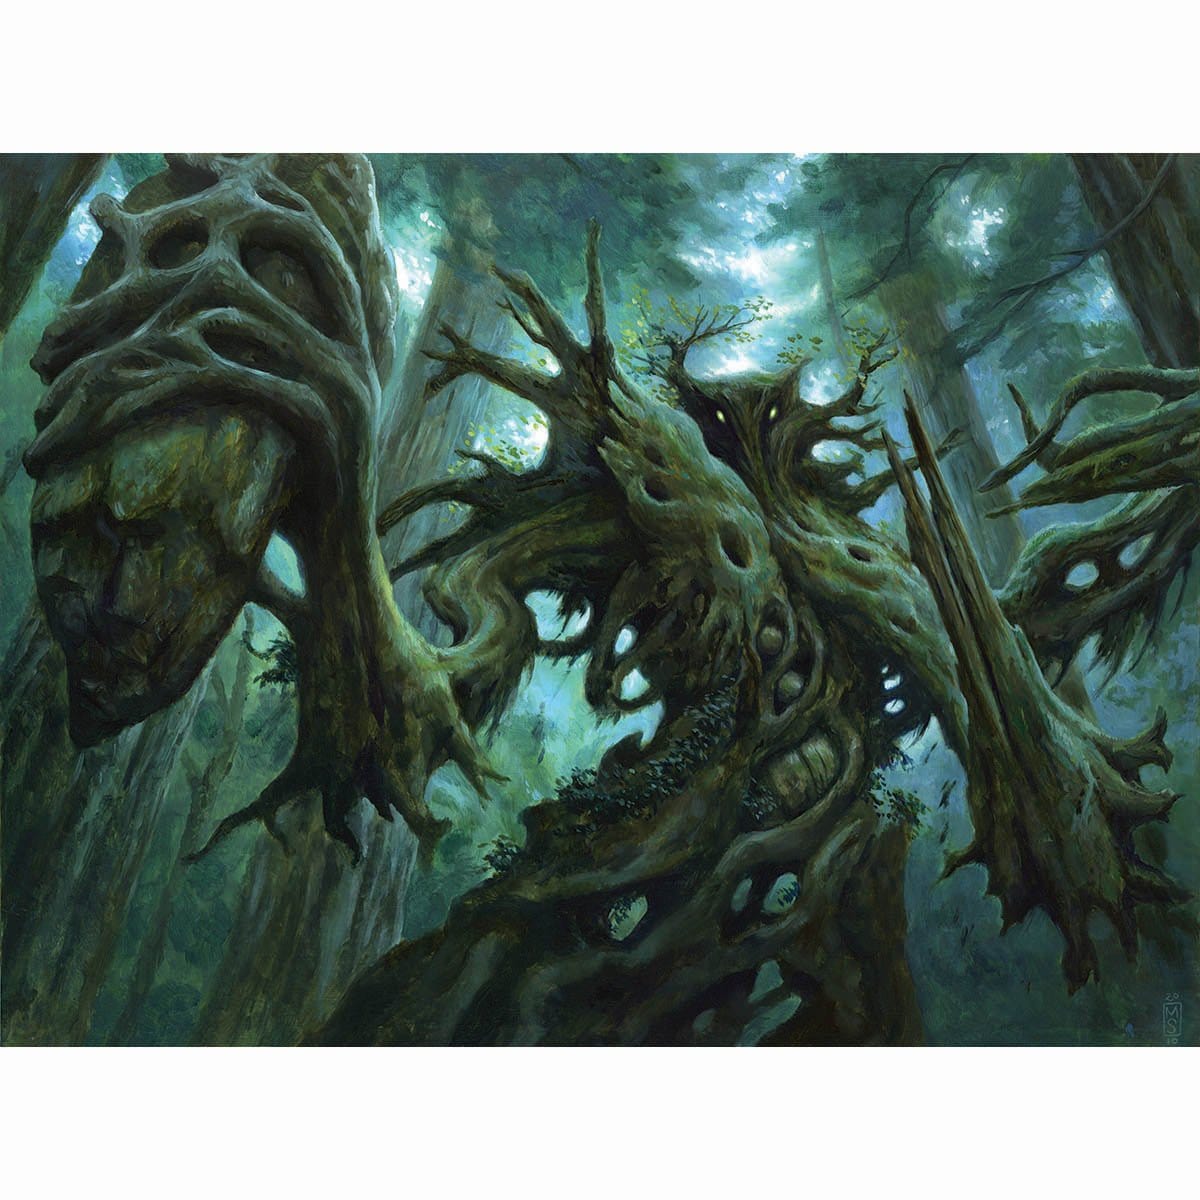 Dungrove Elder Print - Print - Original Magic Art - Accessories for Magic the Gathering and other card games